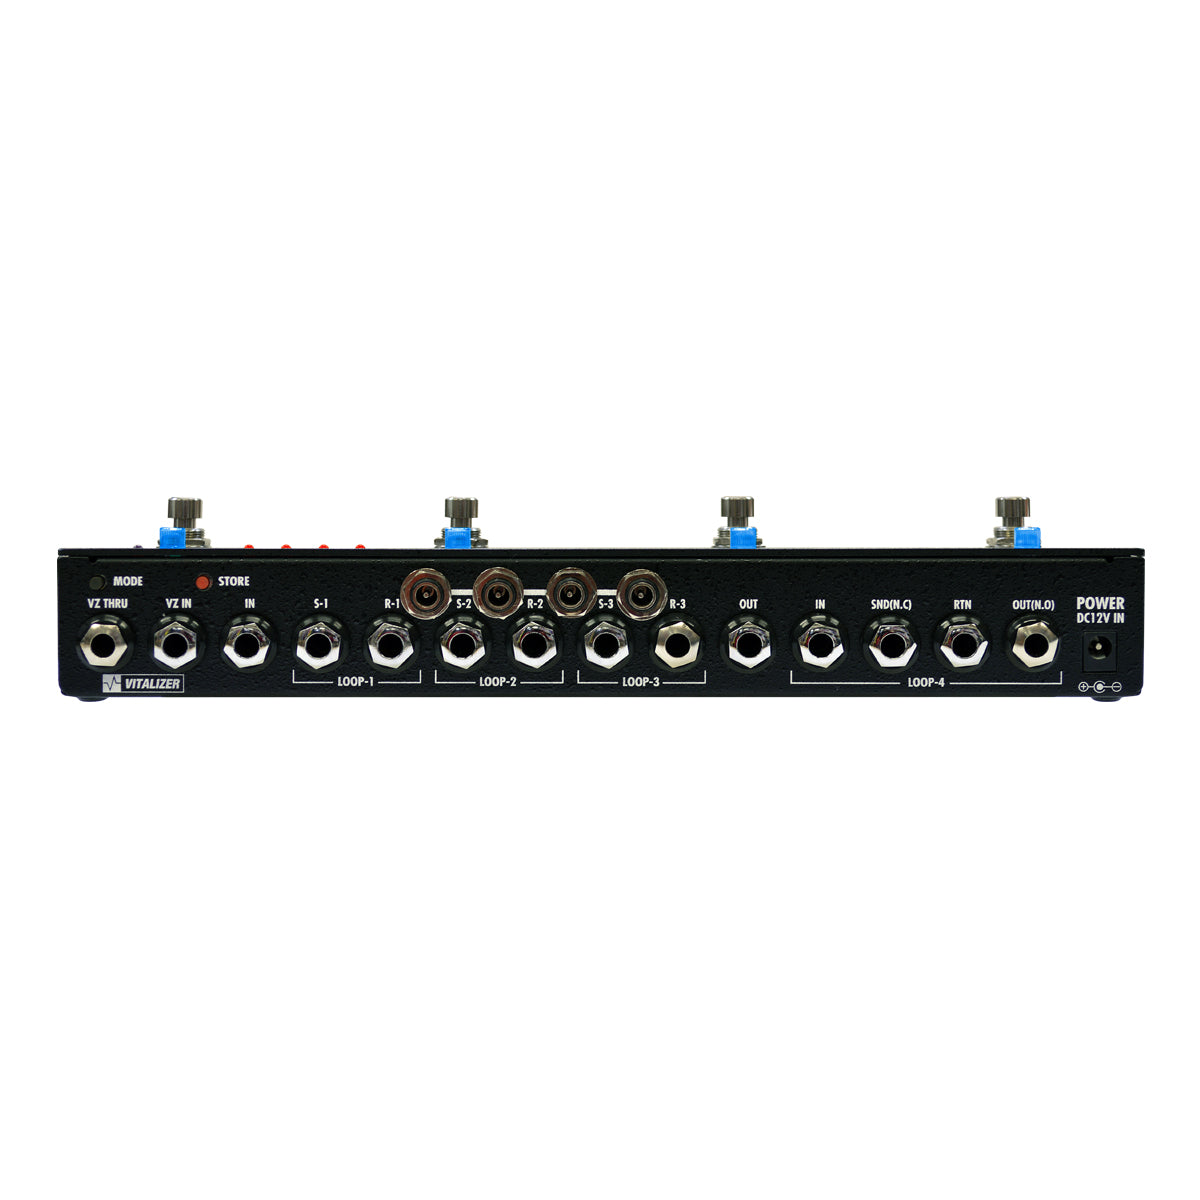 Programmable Effects Controller/PEC-4V – パシフィクス DIRECT & OUTLET